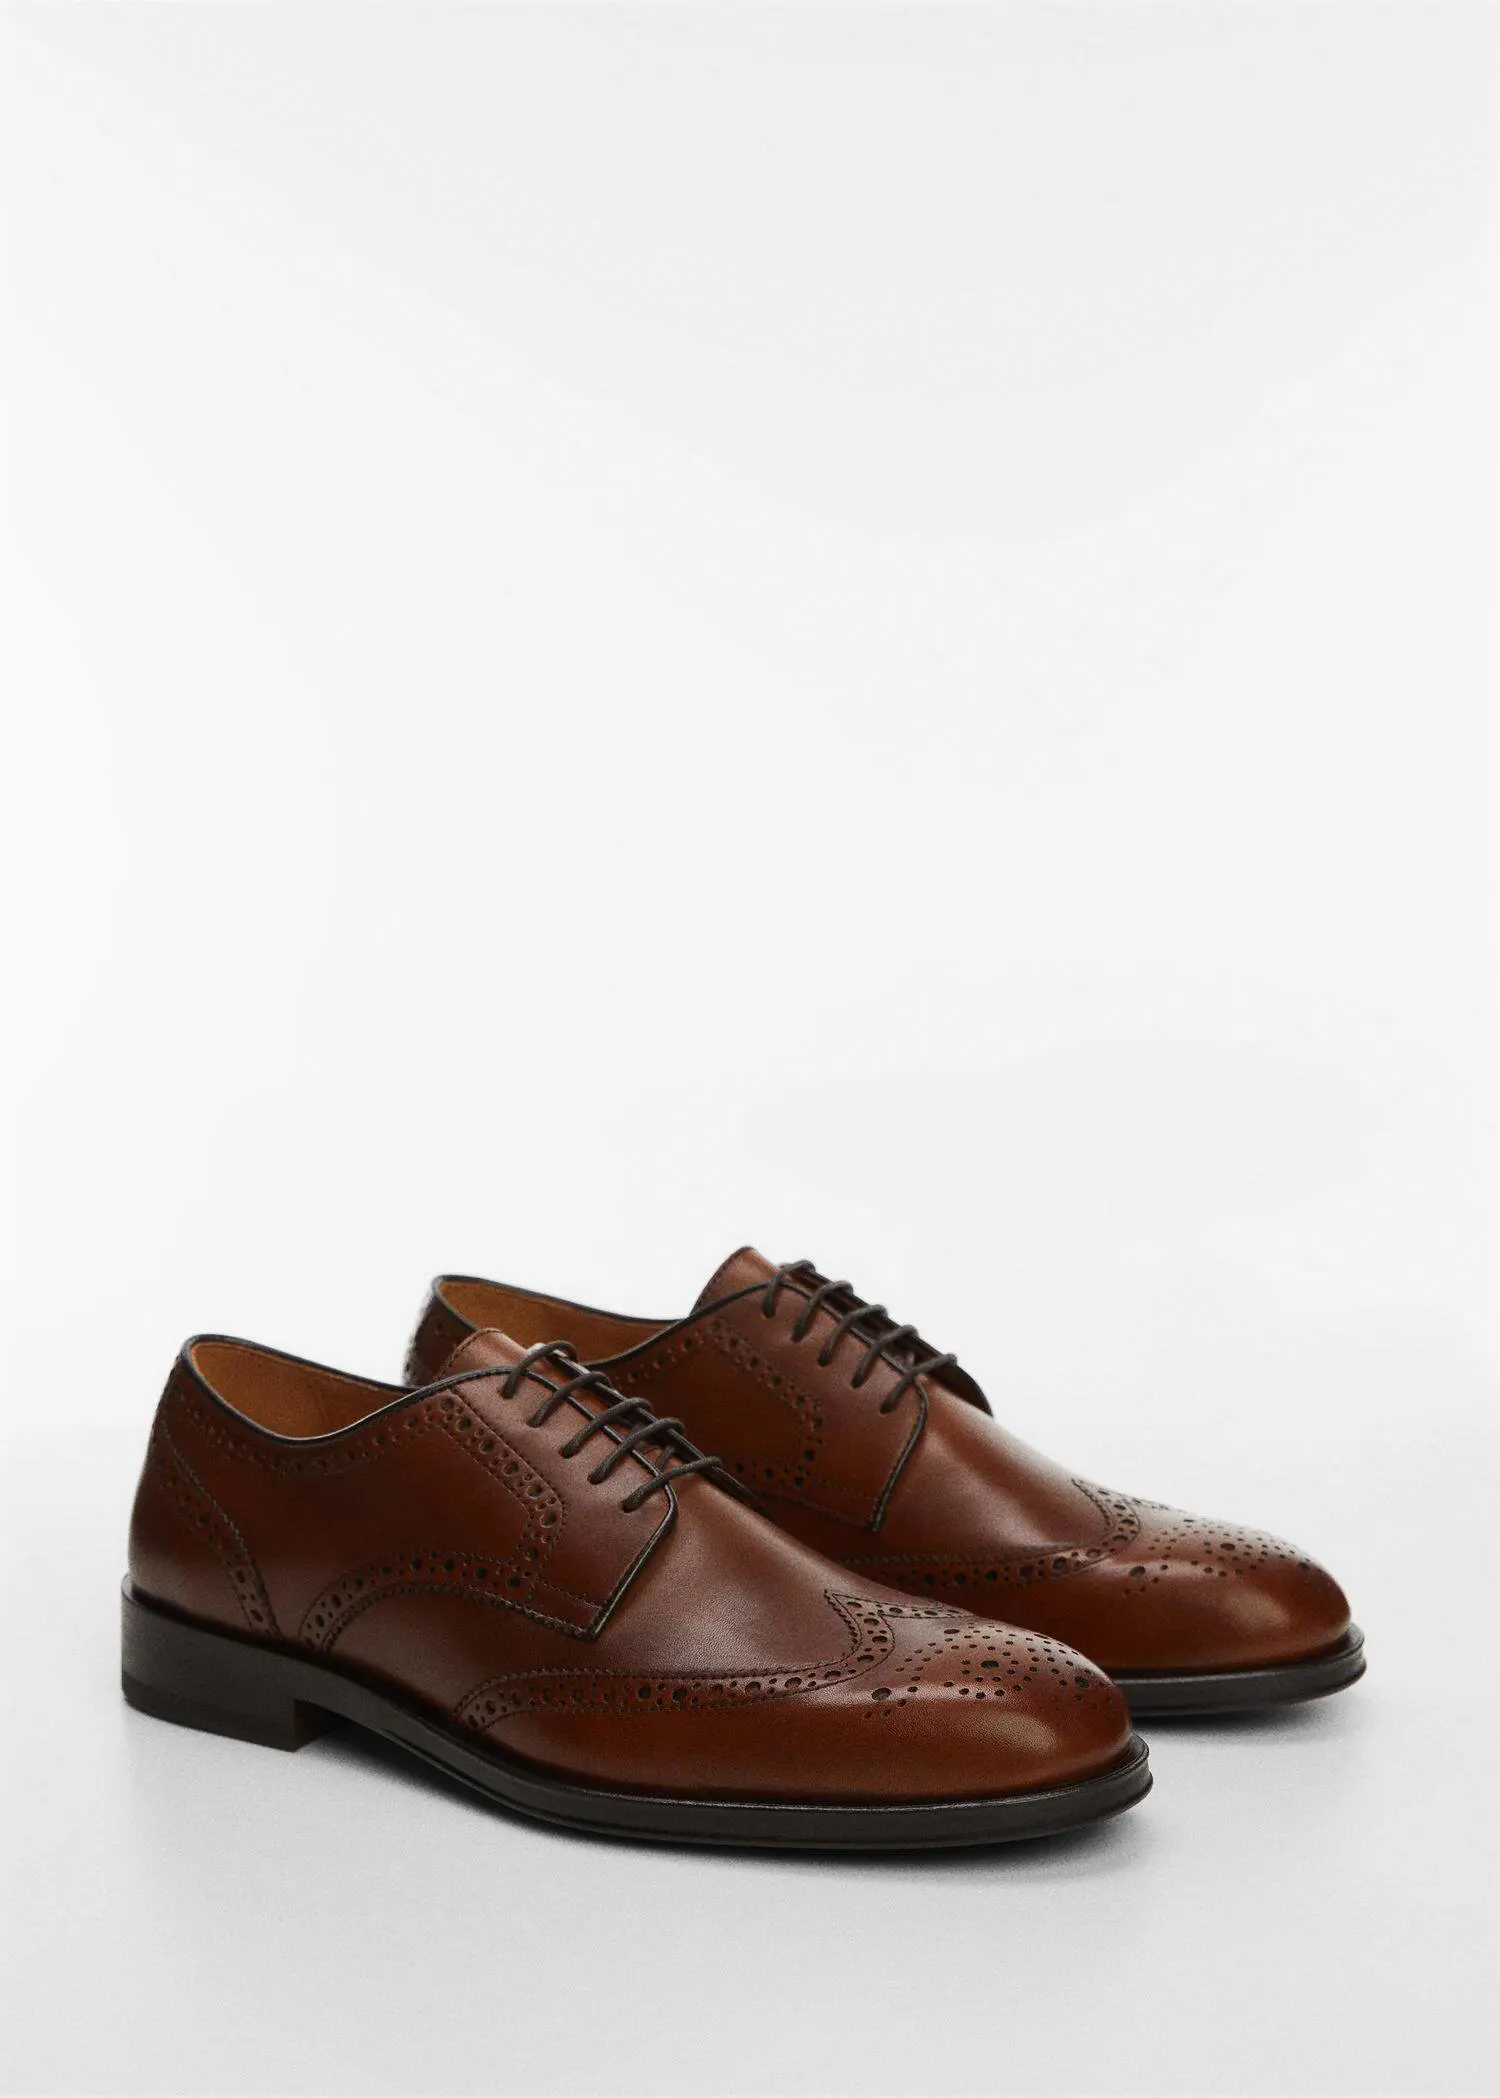 Mango Die-cut leather dress shoes. a pair of brown dress shoes on a white surface. 